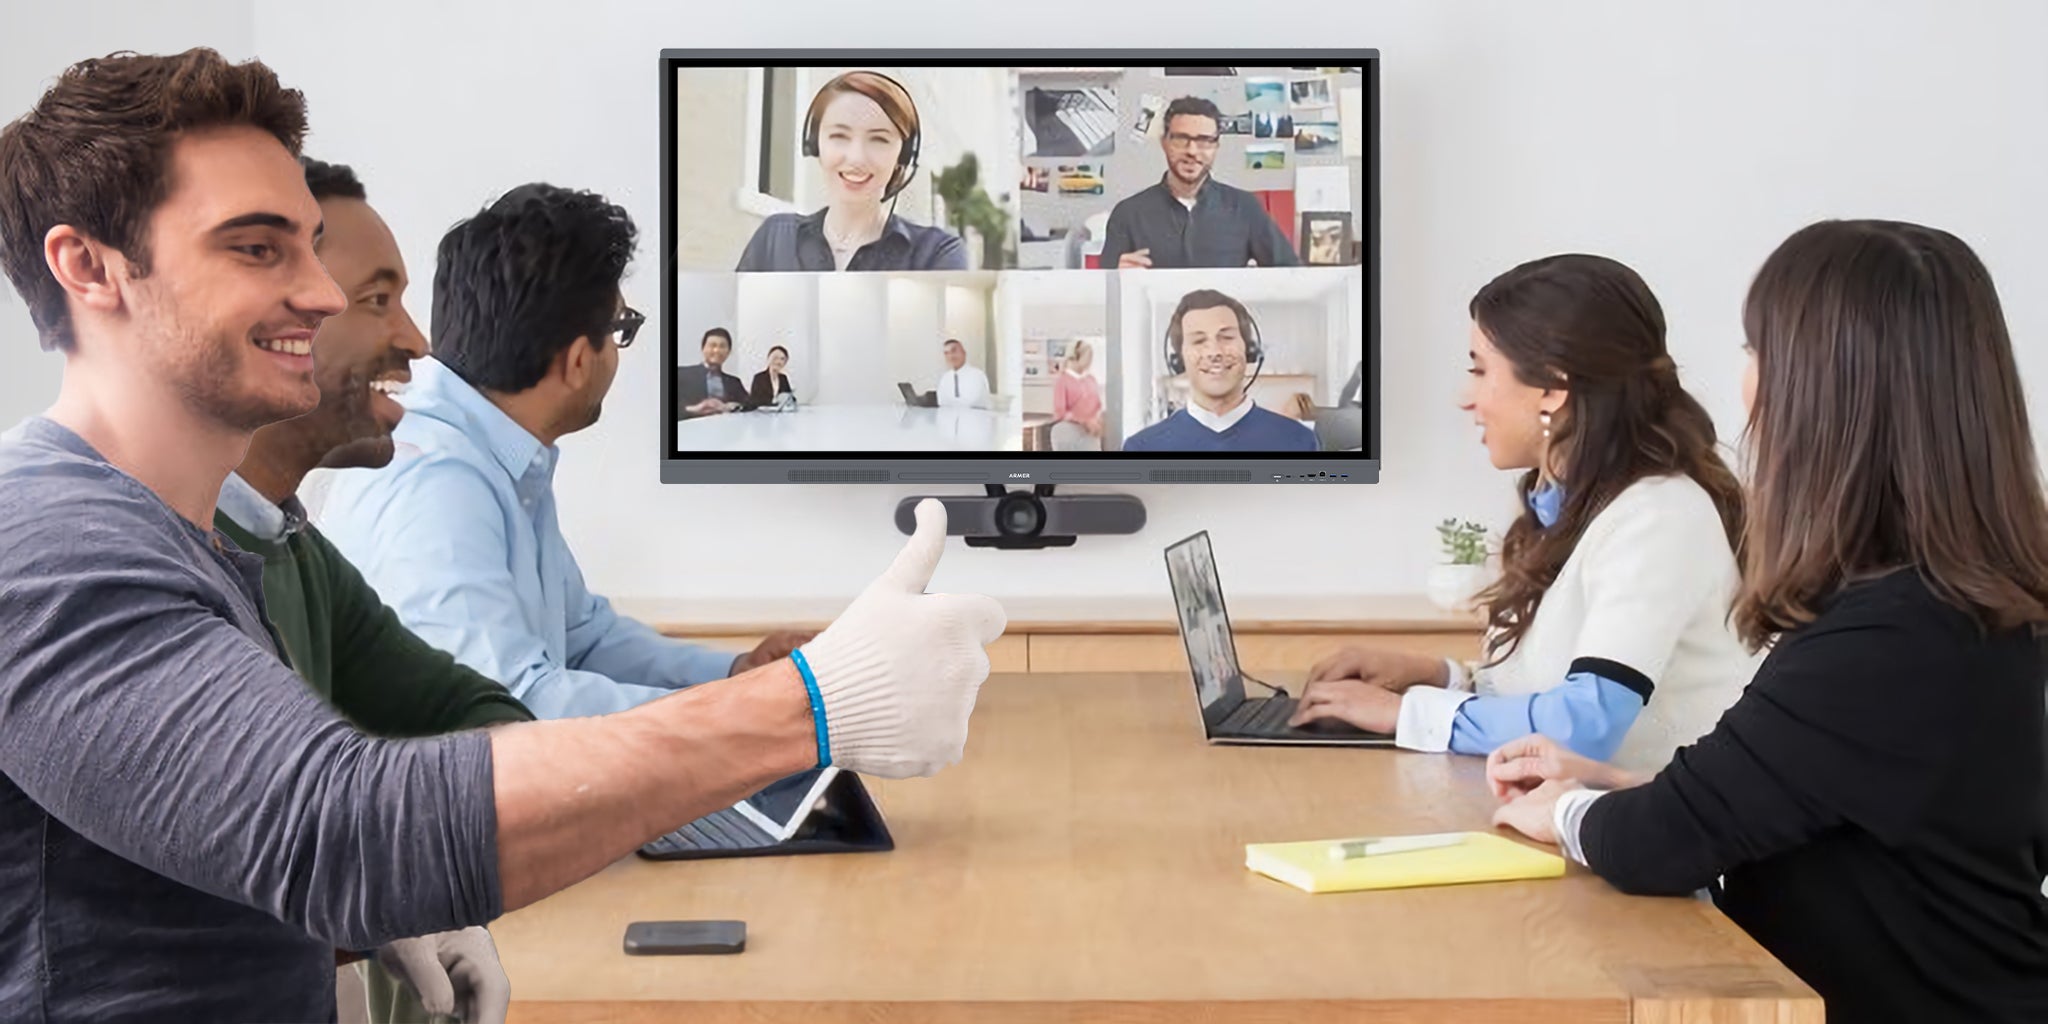 How smart boards play an important role in video conferencing?